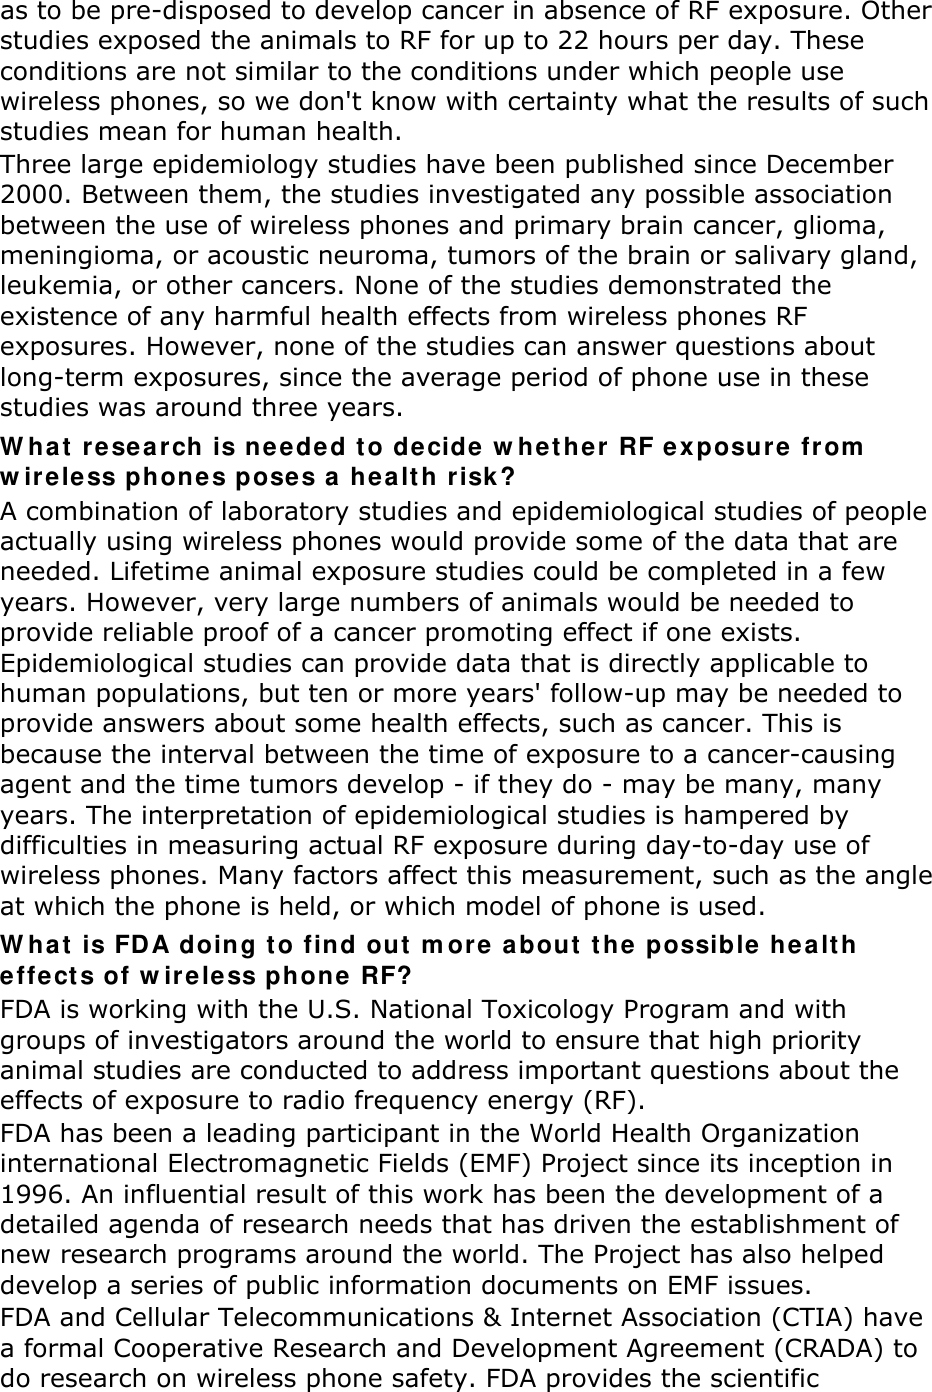 as to be pre-disposed to develop cancer in absence of RF exposure. Other studies exposed the animals to RF for up to 22 hours per day. These conditions are not similar to the conditions under which people use wireless phones, so we don&apos;t know with certainty what the results of such studies mean for human health. Three large epidemiology studies have been published since December 2000. Between them, the studies investigated any possible association between the use of wireless phones and primary brain cancer, glioma, meningioma, or acoustic neuroma, tumors of the brain or salivary gland, leukemia, or other cancers. None of the studies demonstrated the existence of any harmful health effects from wireless phones RF exposures. However, none of the studies can answer questions about long-term exposures, since the average period of phone use in these studies was around three years. W hat research is neede d t o decide  w he t her RF e xposur e from  w ir ele ss phones pose s a  h ealt h  r isk ? A combination of laboratory studies and epidemiological studies of people actually using wireless phones would provide some of the data that are needed. Lifetime animal exposure studies could be completed in a few years. However, very large numbers of animals would be needed to provide reliable proof of a cancer promoting effect if one exists. Epidemiological studies can provide data that is directly applicable to human populations, but ten or more years&apos; follow-up may be needed to provide answers about some health effects, such as cancer. This is because the interval between the time of exposure to a cancer-causing agent and the time tumors develop - if they do - may be many, many years. The interpretation of epidemiological studies is hampered by difficulties in measuring actual RF exposure during day-to-day use of wireless phones. Many factors affect this measurement, such as the angle at which the phone is held, or which model of phone is used. W hat  is FDA doing t o find out m or e a bout  t he possible  healt h effect s of w irele ss phone RF? FDA is working with the U.S. National Toxicology Program and with groups of investigators around the world to ensure that high priority animal studies are conducted to address important questions about the effects of exposure to radio frequency energy (RF). FDA has been a leading participant in the World Health Organization international Electromagnetic Fields (EMF) Project since its inception in 1996. An influential result of this work has been the development of a detailed agenda of research needs that has driven the establishment of new research programs around the world. The Project has also helped develop a series of public information documents on EMF issues. FDA and Cellular Telecommunications &amp; Internet Association (CTIA) have a formal Cooperative Research and Development Agreement (CRADA) to do research on wireless phone safety. FDA provides the scientific 